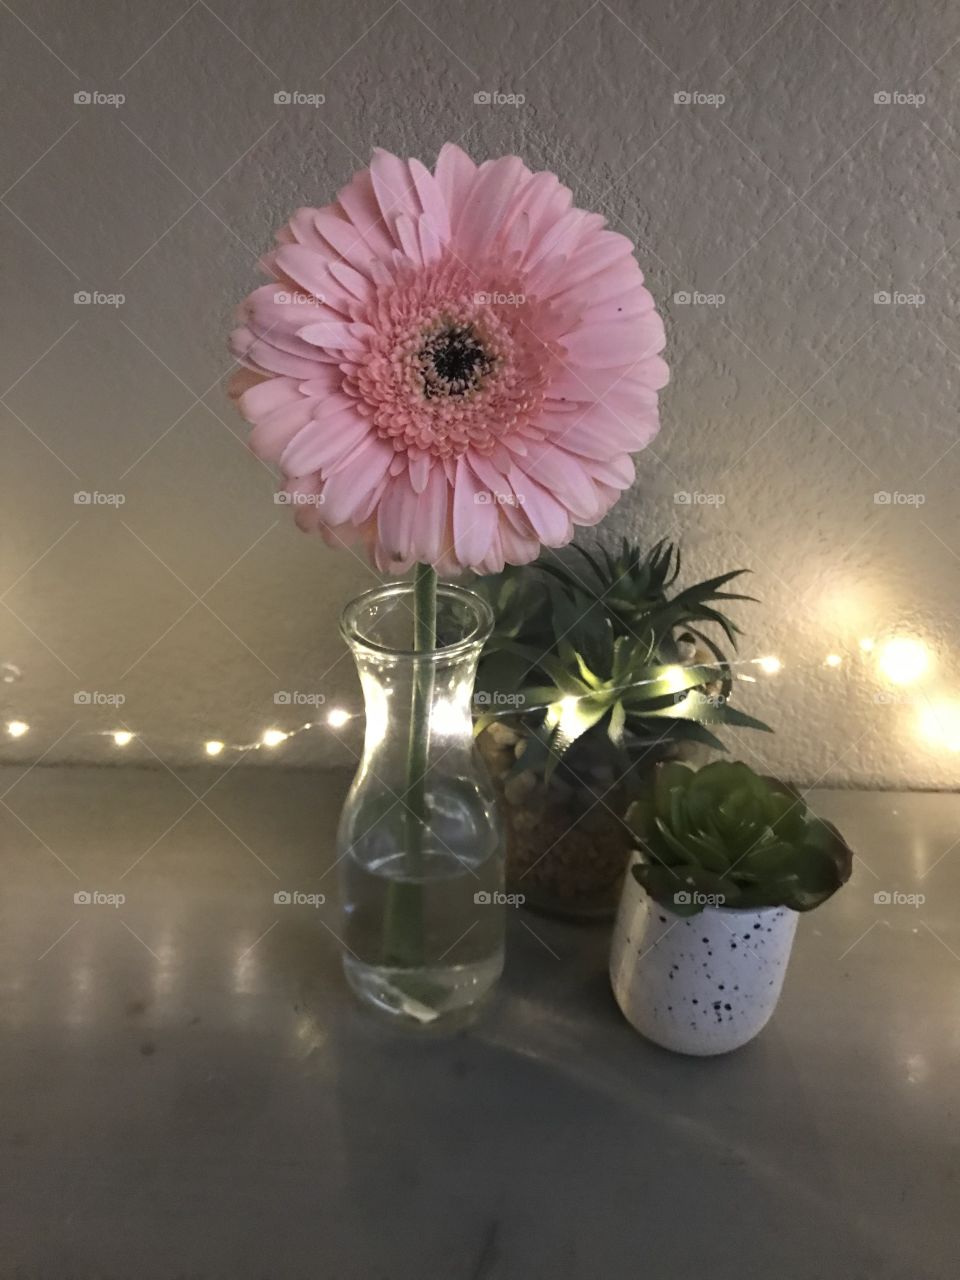 Bright Pink beautiful daisy surrounded by green plants and glowing white lights on a countertop  